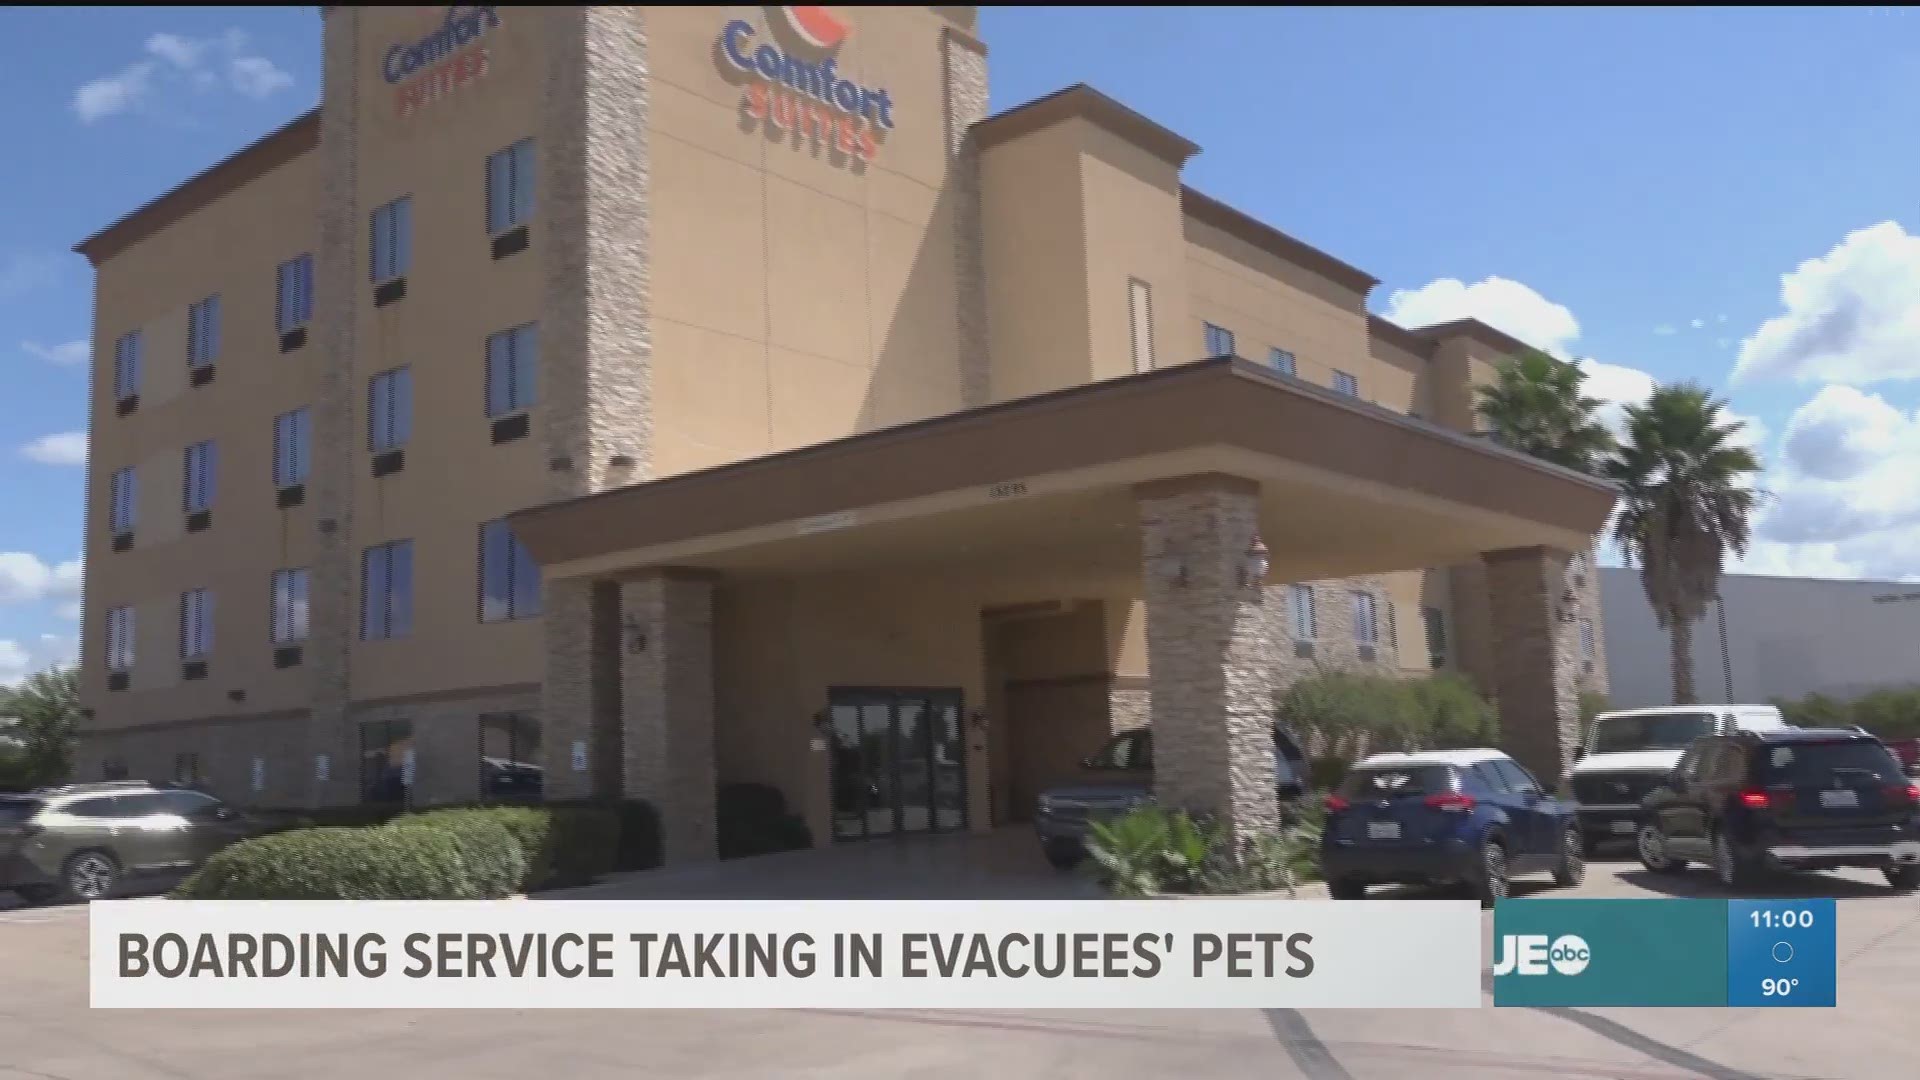 A dog boarding company in Round Rock hopes to give Hurricane Laura evacuees one less thing to worry about. For those with pets, it can be tricky to find a hotel.